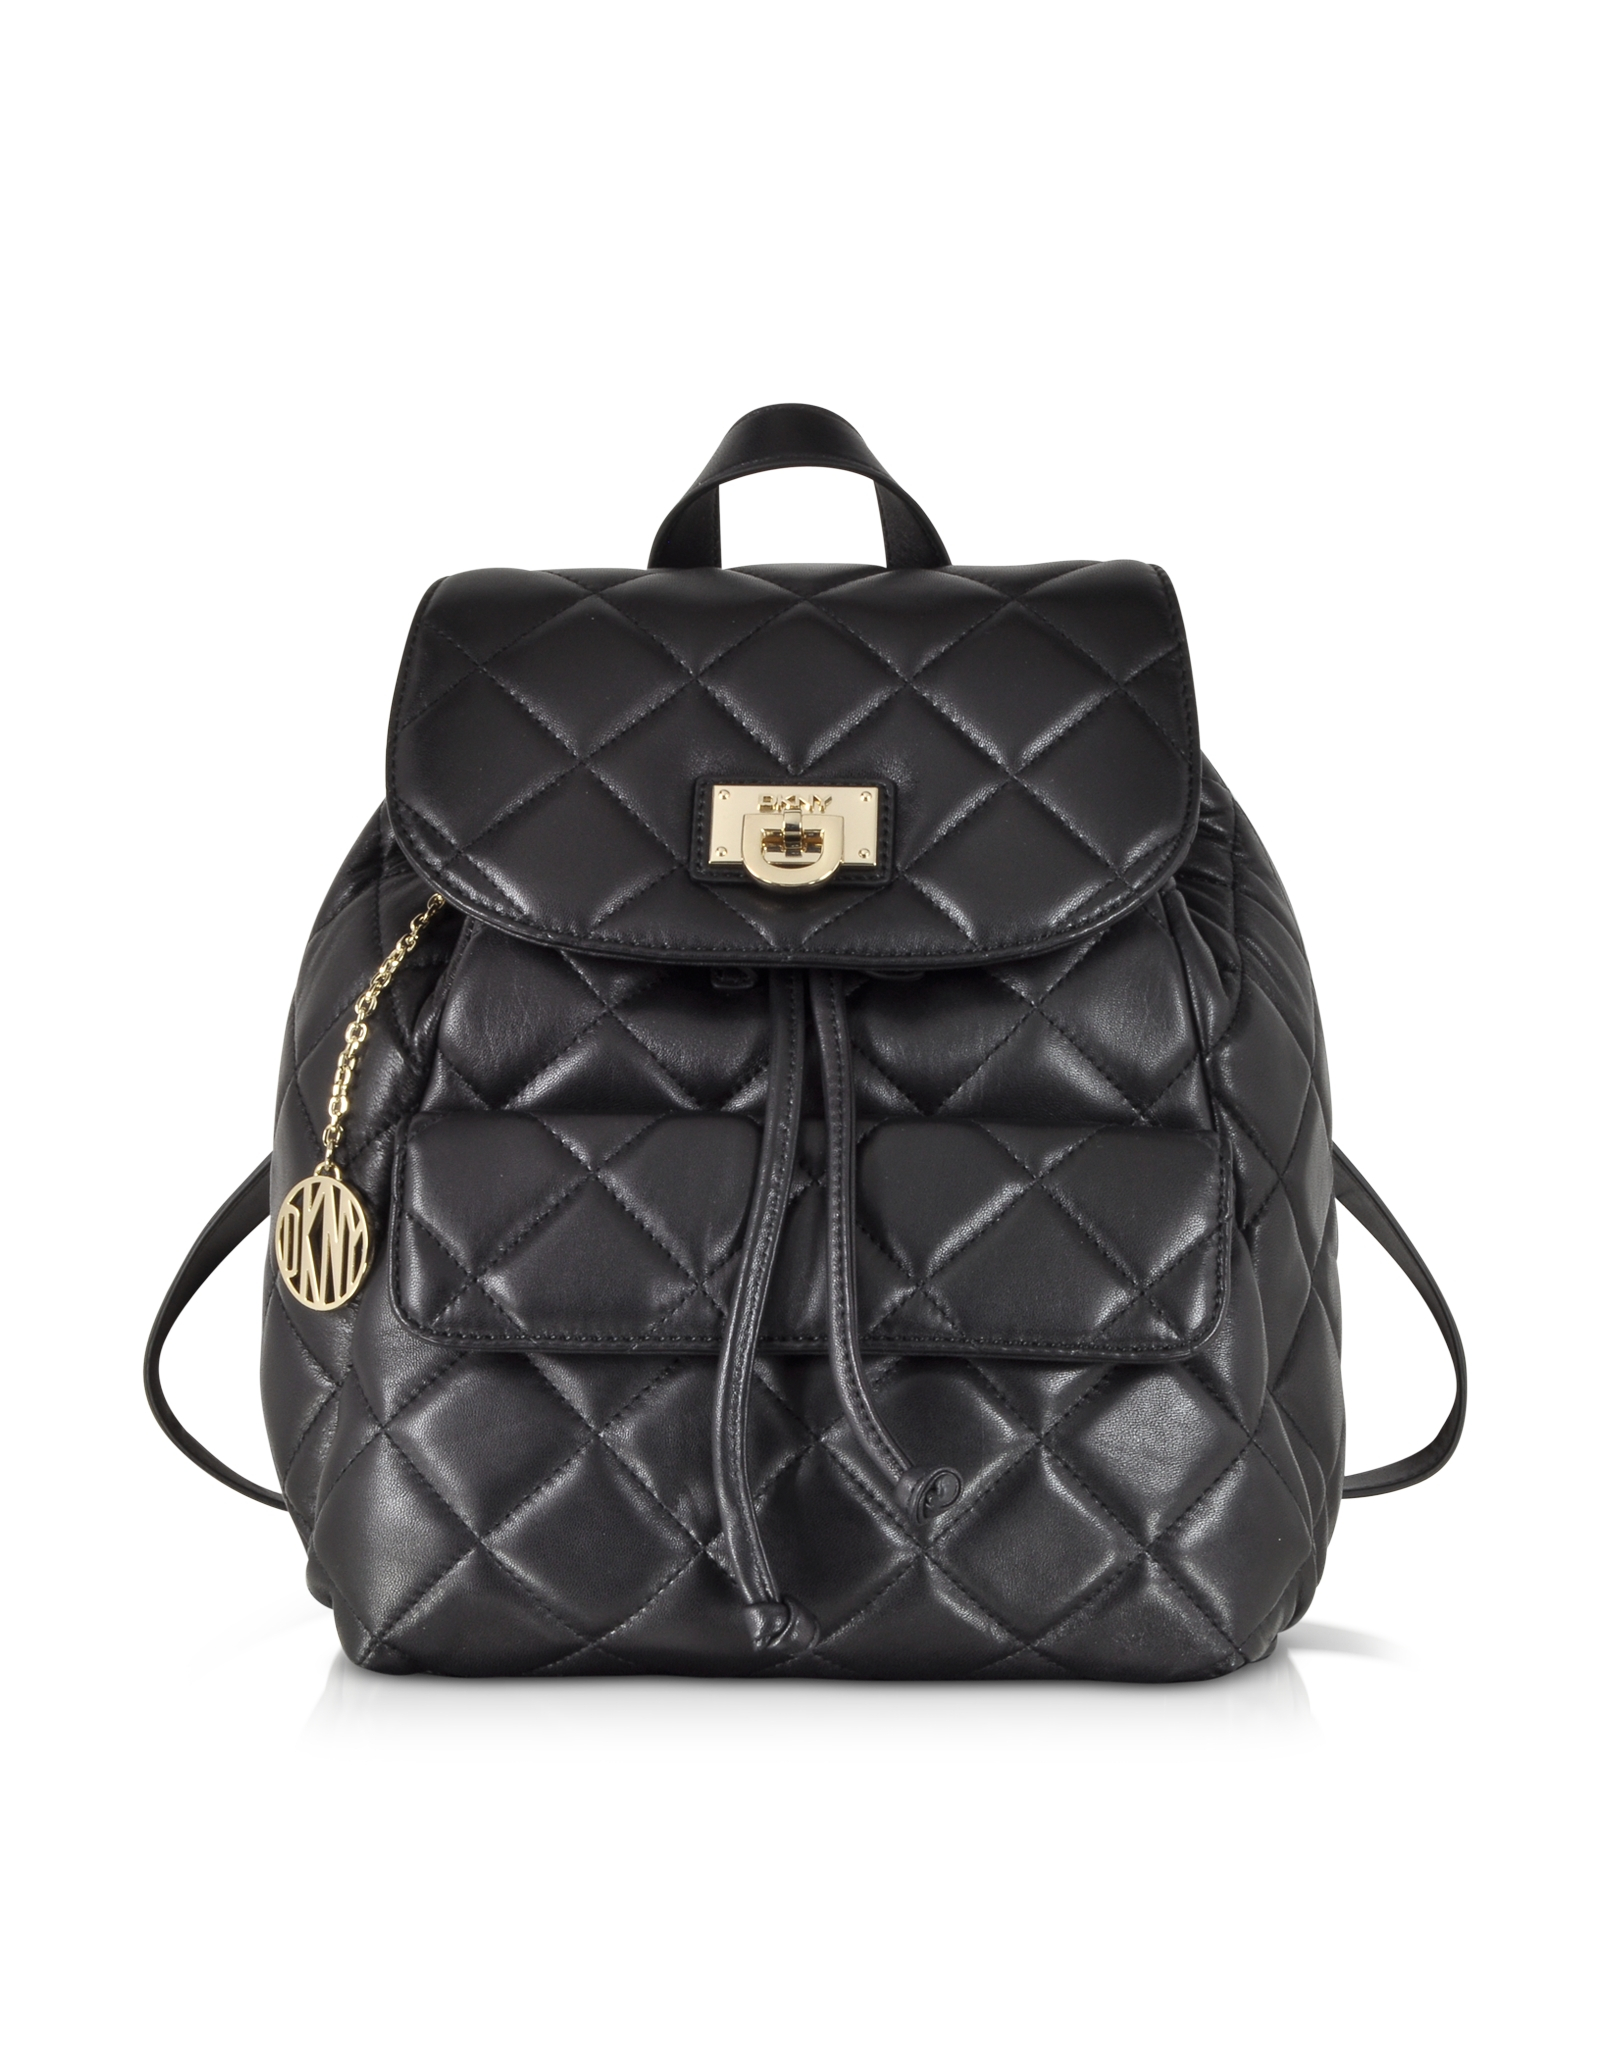 Lyst - Dkny Gansevoort Black Quilted Nappa Leather Backpack in Black